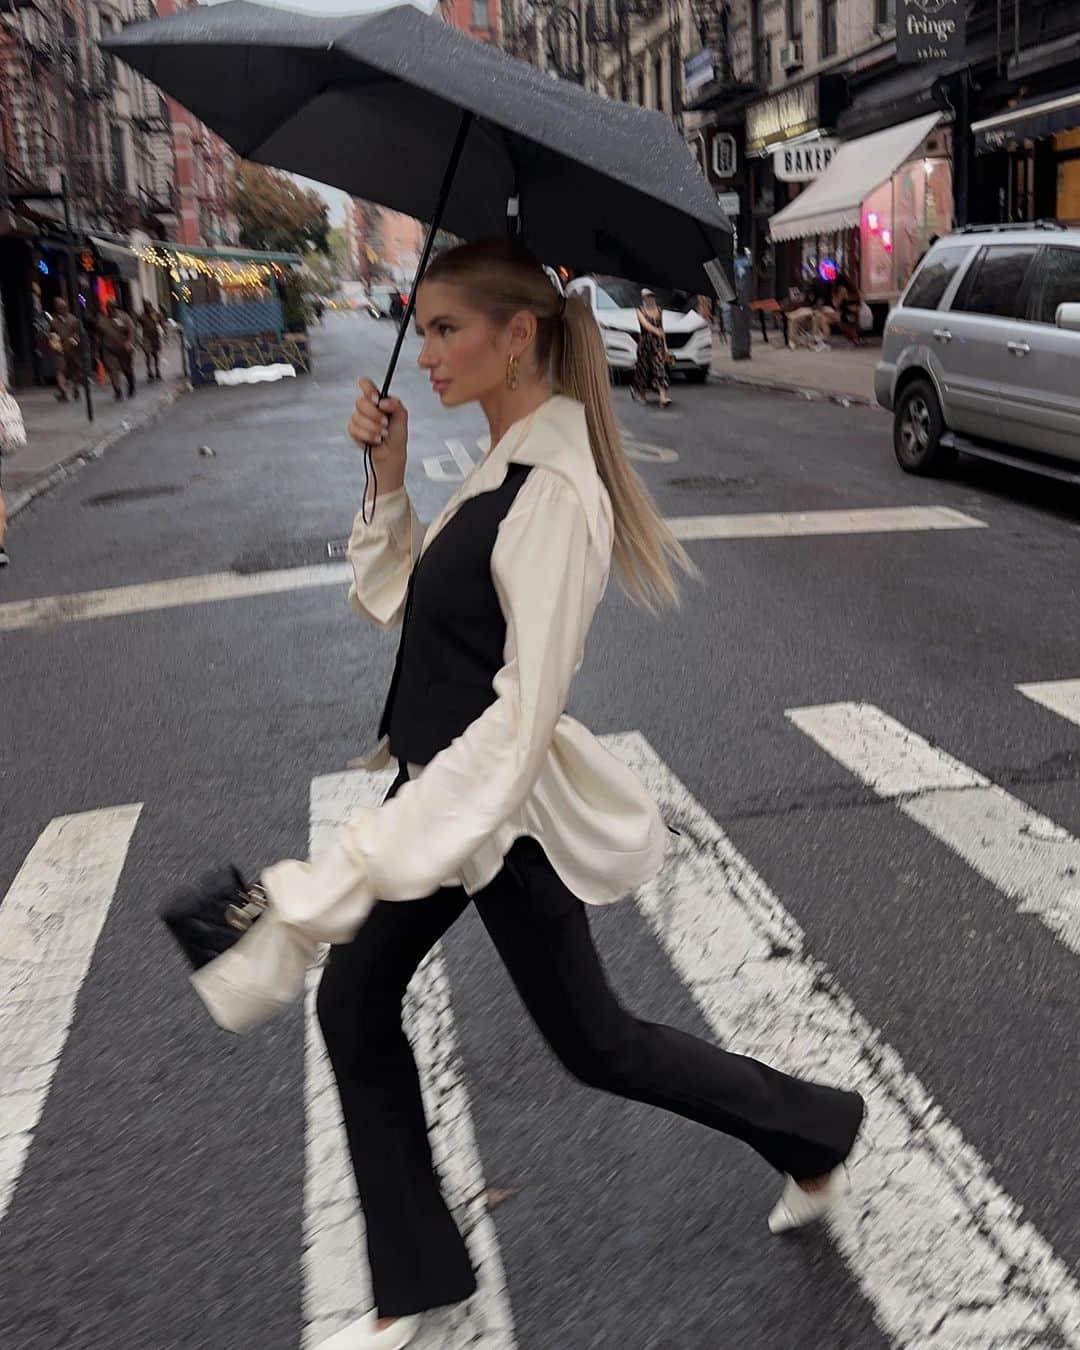 Xenia Adontsのインスタグラム：「Fashion week???? I’m fashion strong! 🤪 starting off with @helmutlang who’s been on mine and everybody’s mood boards since the 90s and ending with a wet shoot (and Jürgen notably giving me shit for my running style in heels „Nobody runs like this“ well guessed I proved him wrong! The sims runs like this!)」